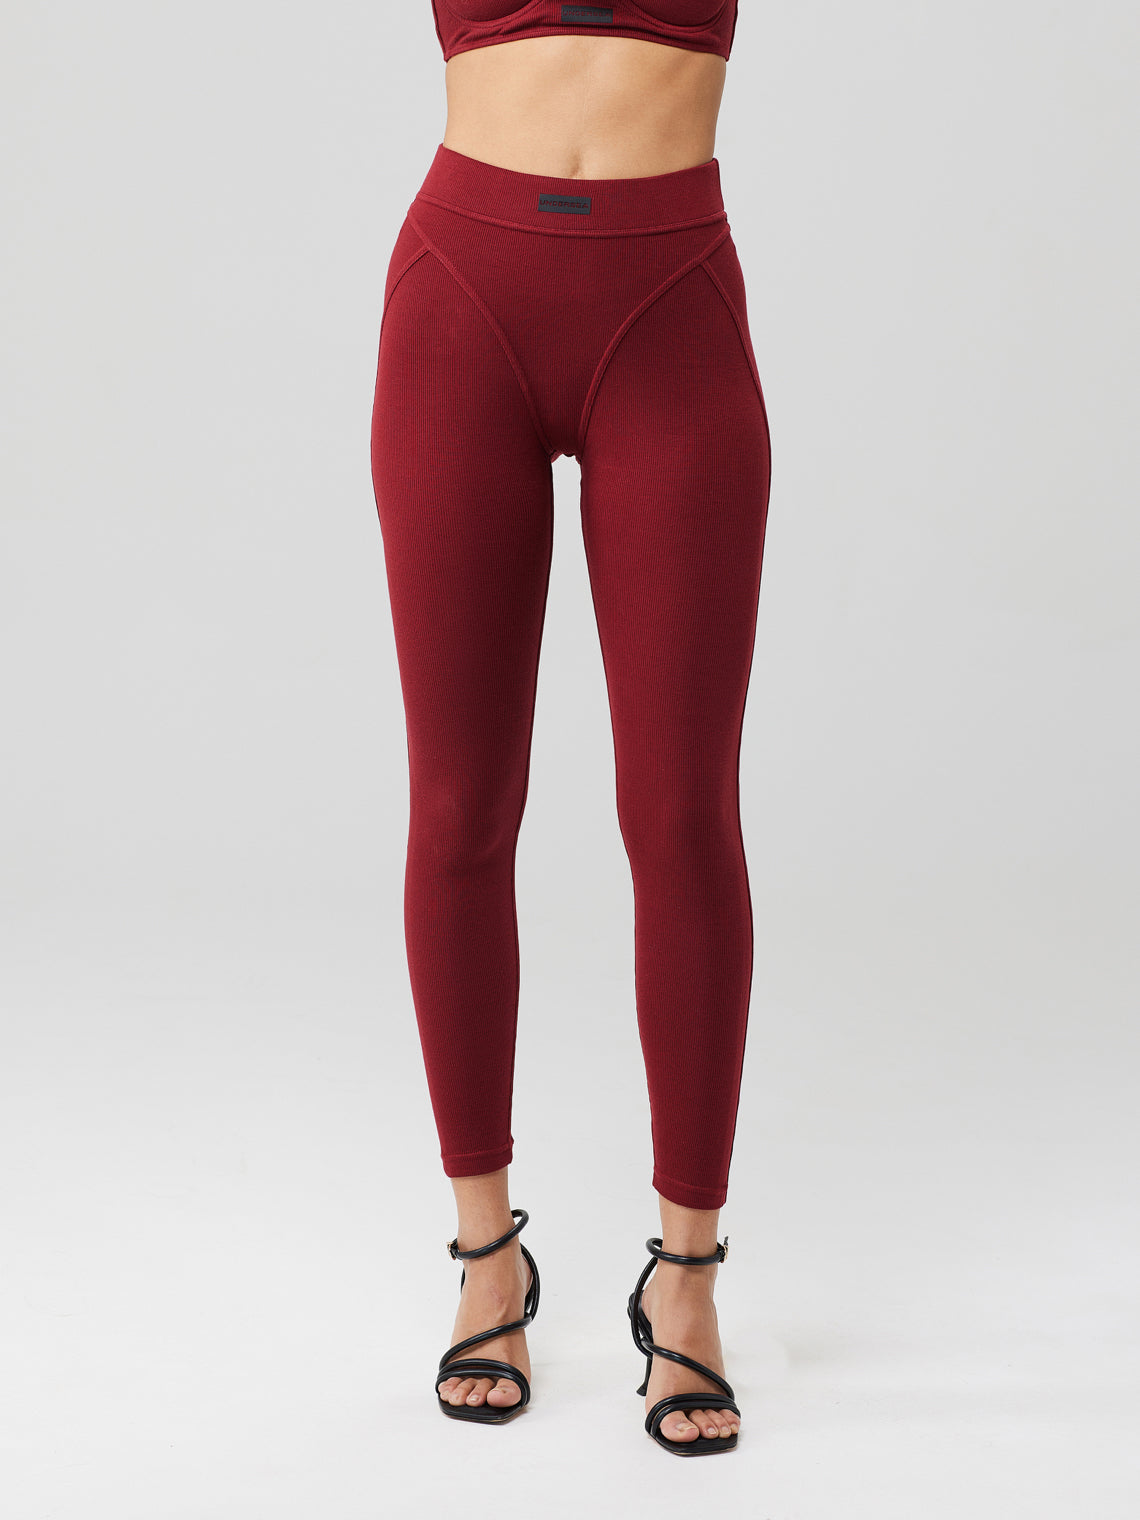 CORE ACTIVE BOTTOM 02 - FALL RED